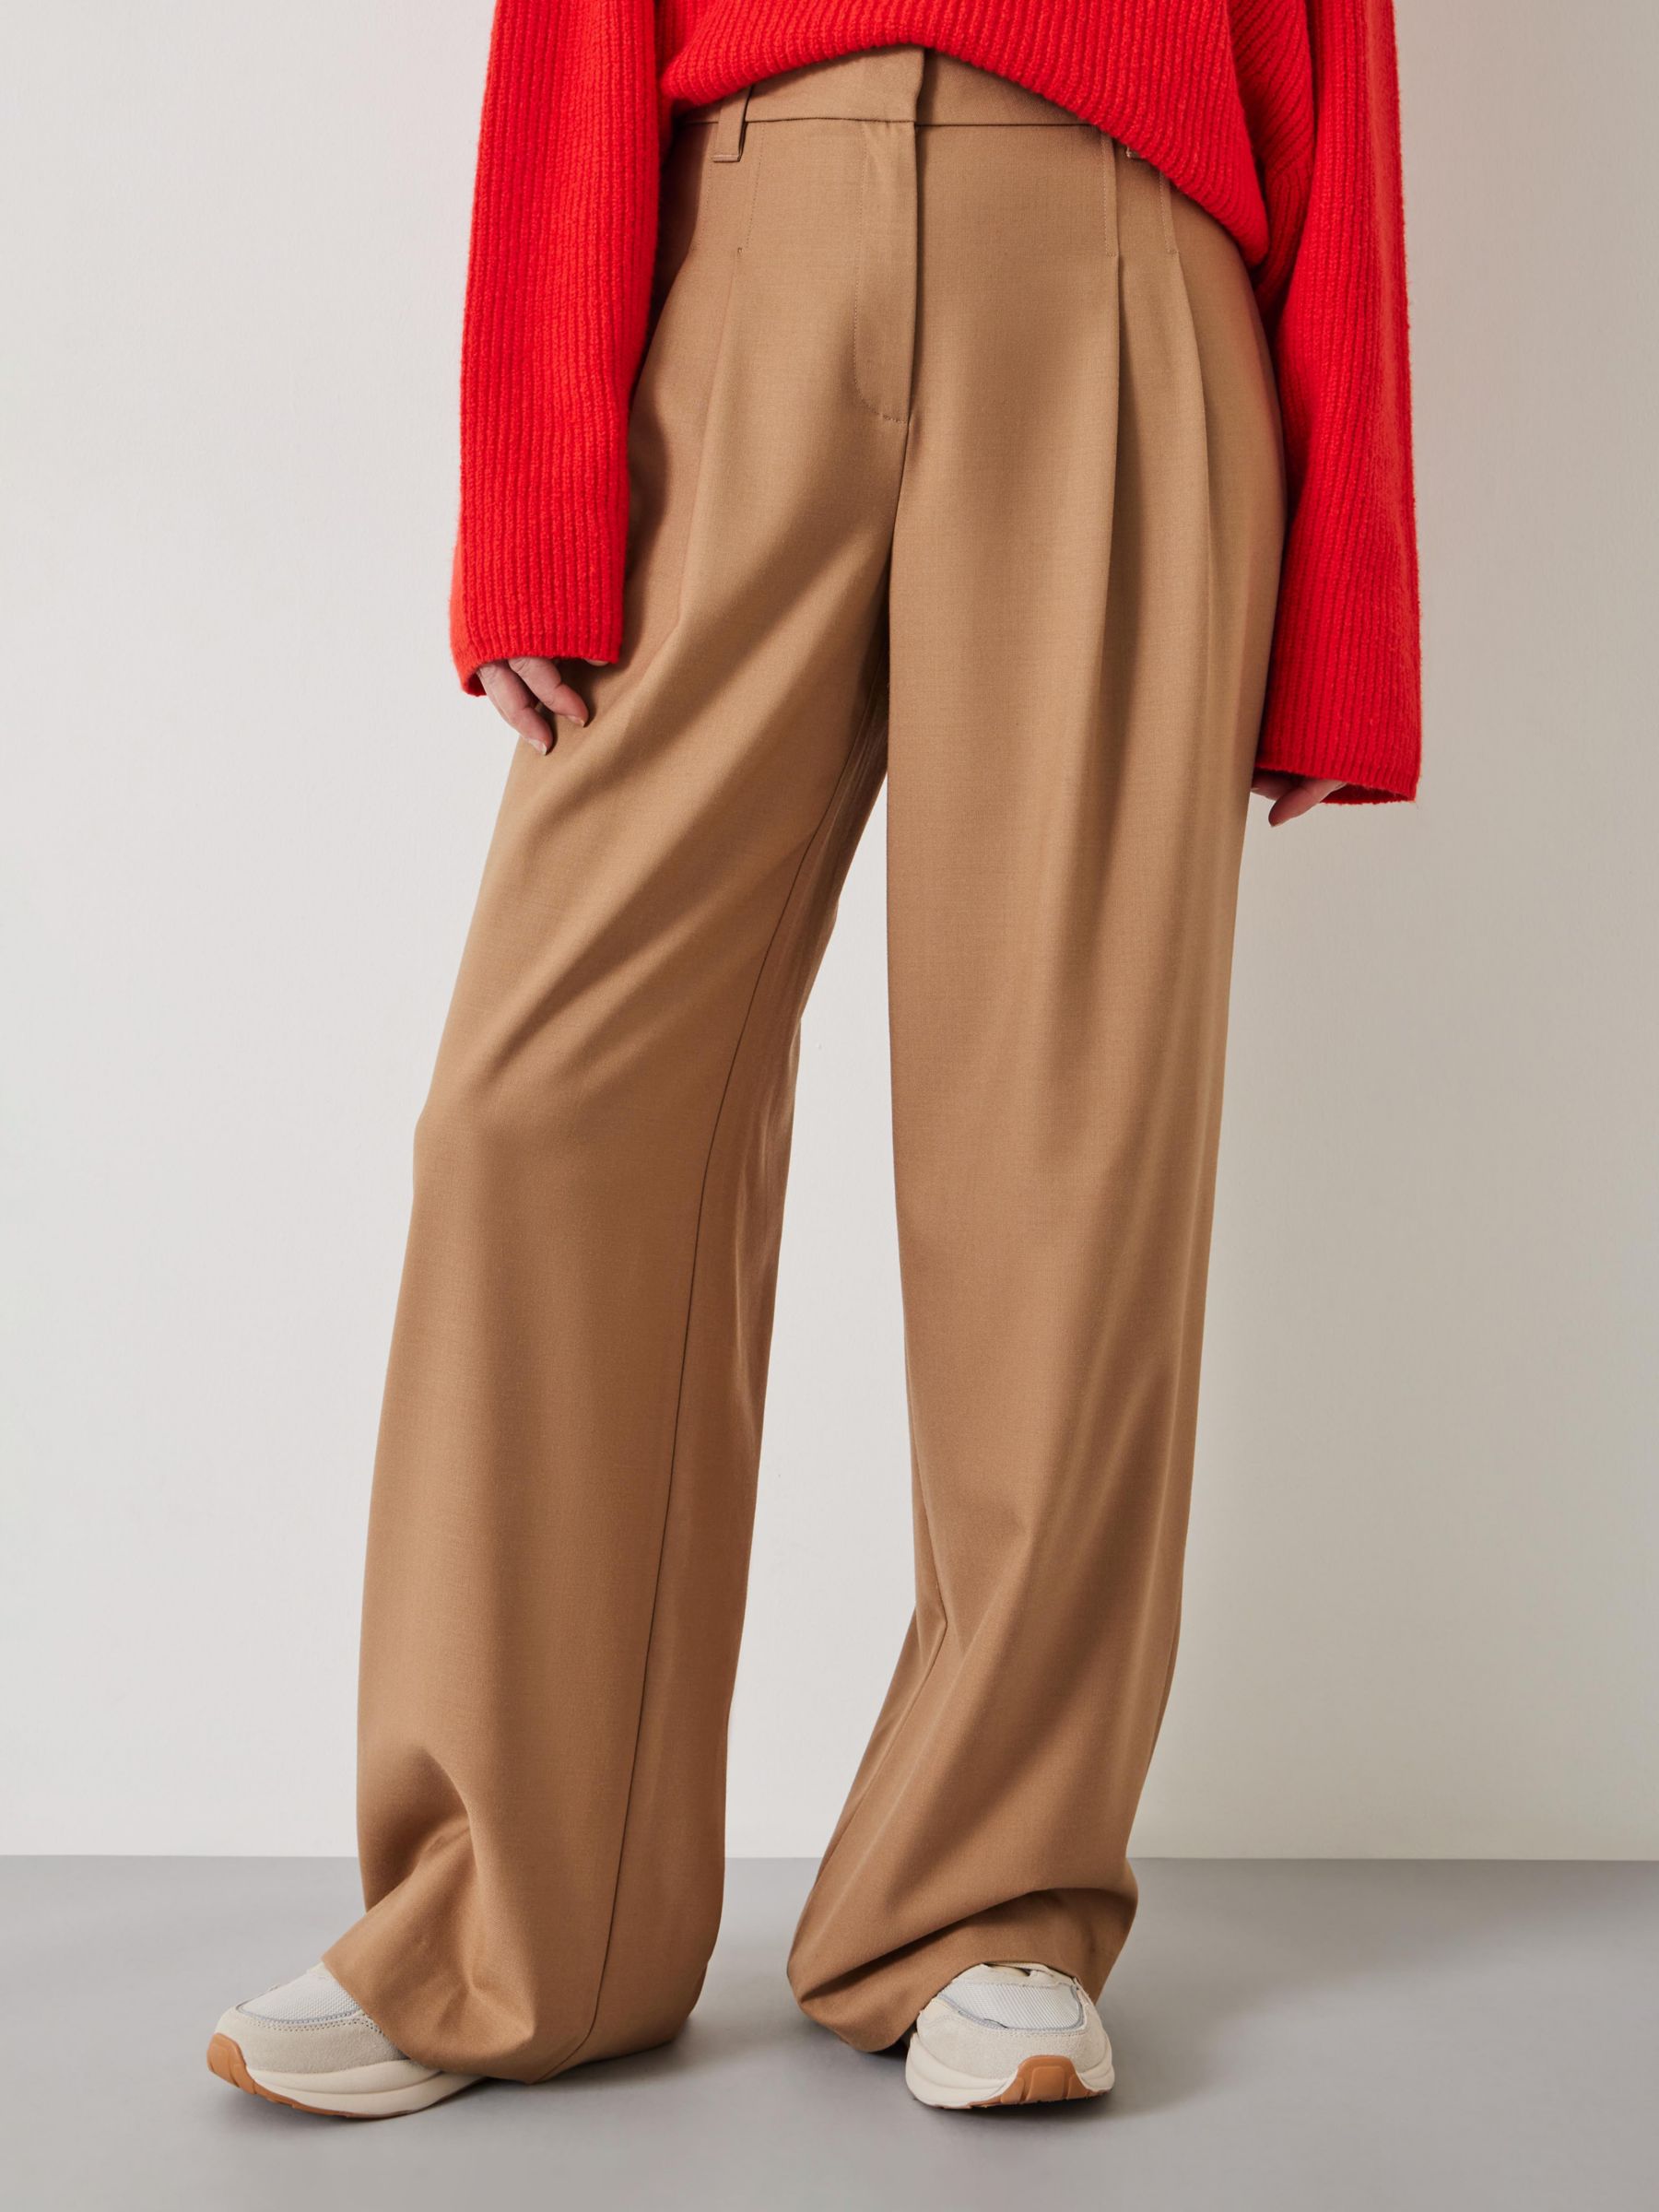 Textured Wool Chino Wide Leg Trousers, Red